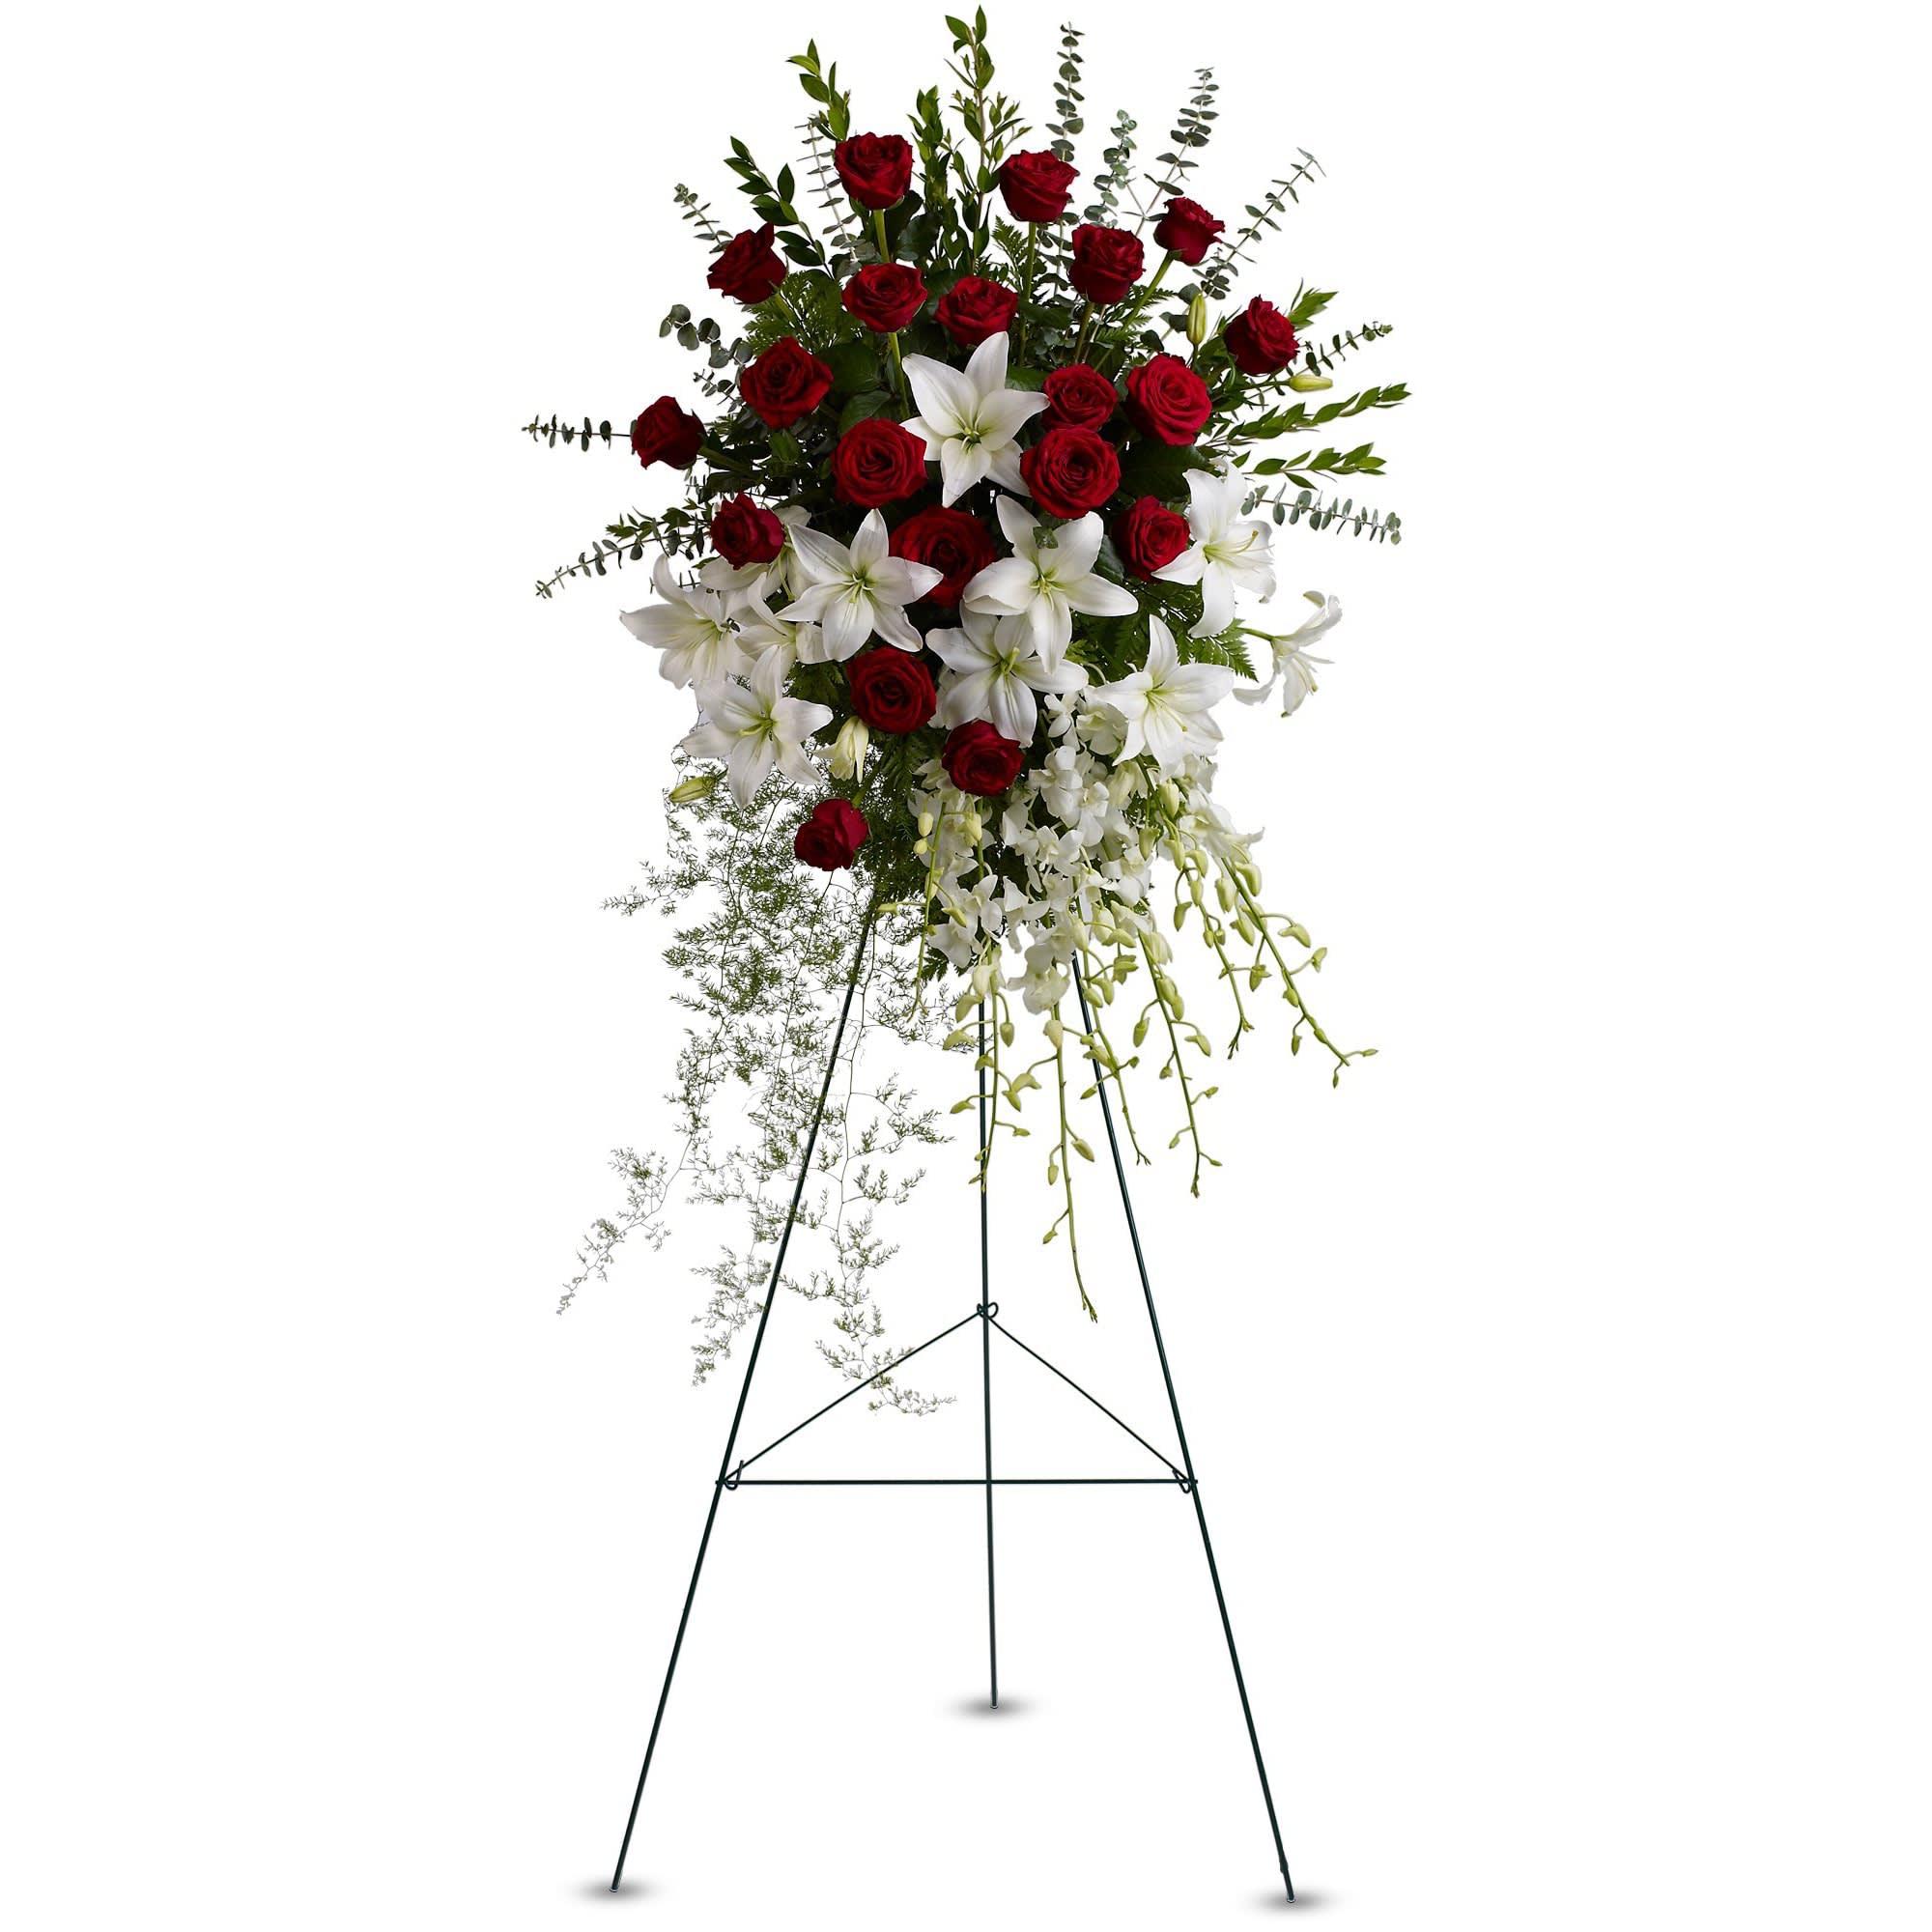 Lily and Rose Tribute Spray by Teleflora - Pure white lilies and dendrobium orchids mingle with red roses, white asiatic lilies and more in this magnificent and impressive standing spray of the finest blooms. A fitting tribute for a funeral, wake or memorial service.  